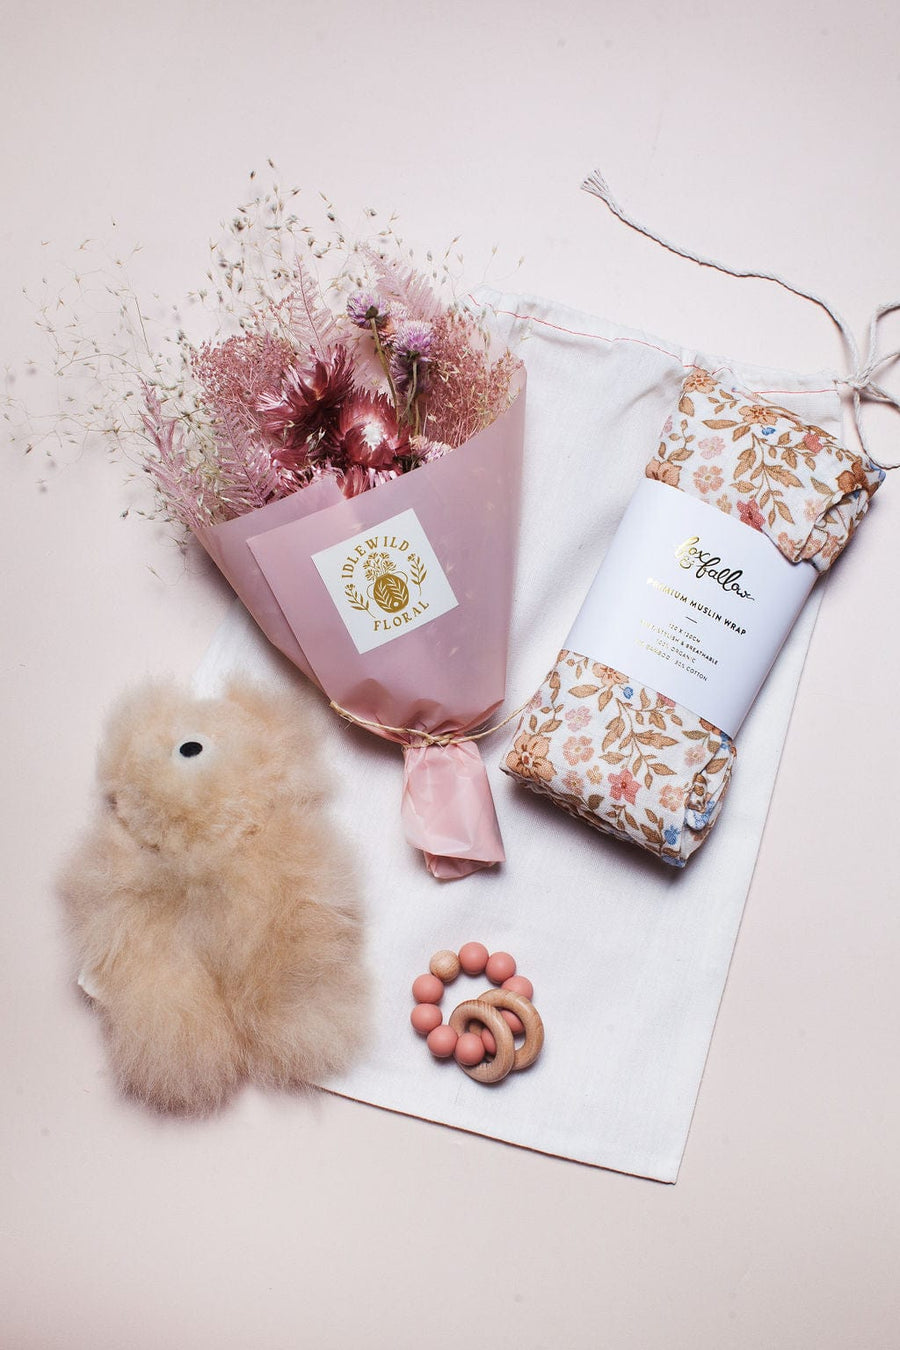 Idlewild Floral Co. Gift Giving Baby Girl Gift Set